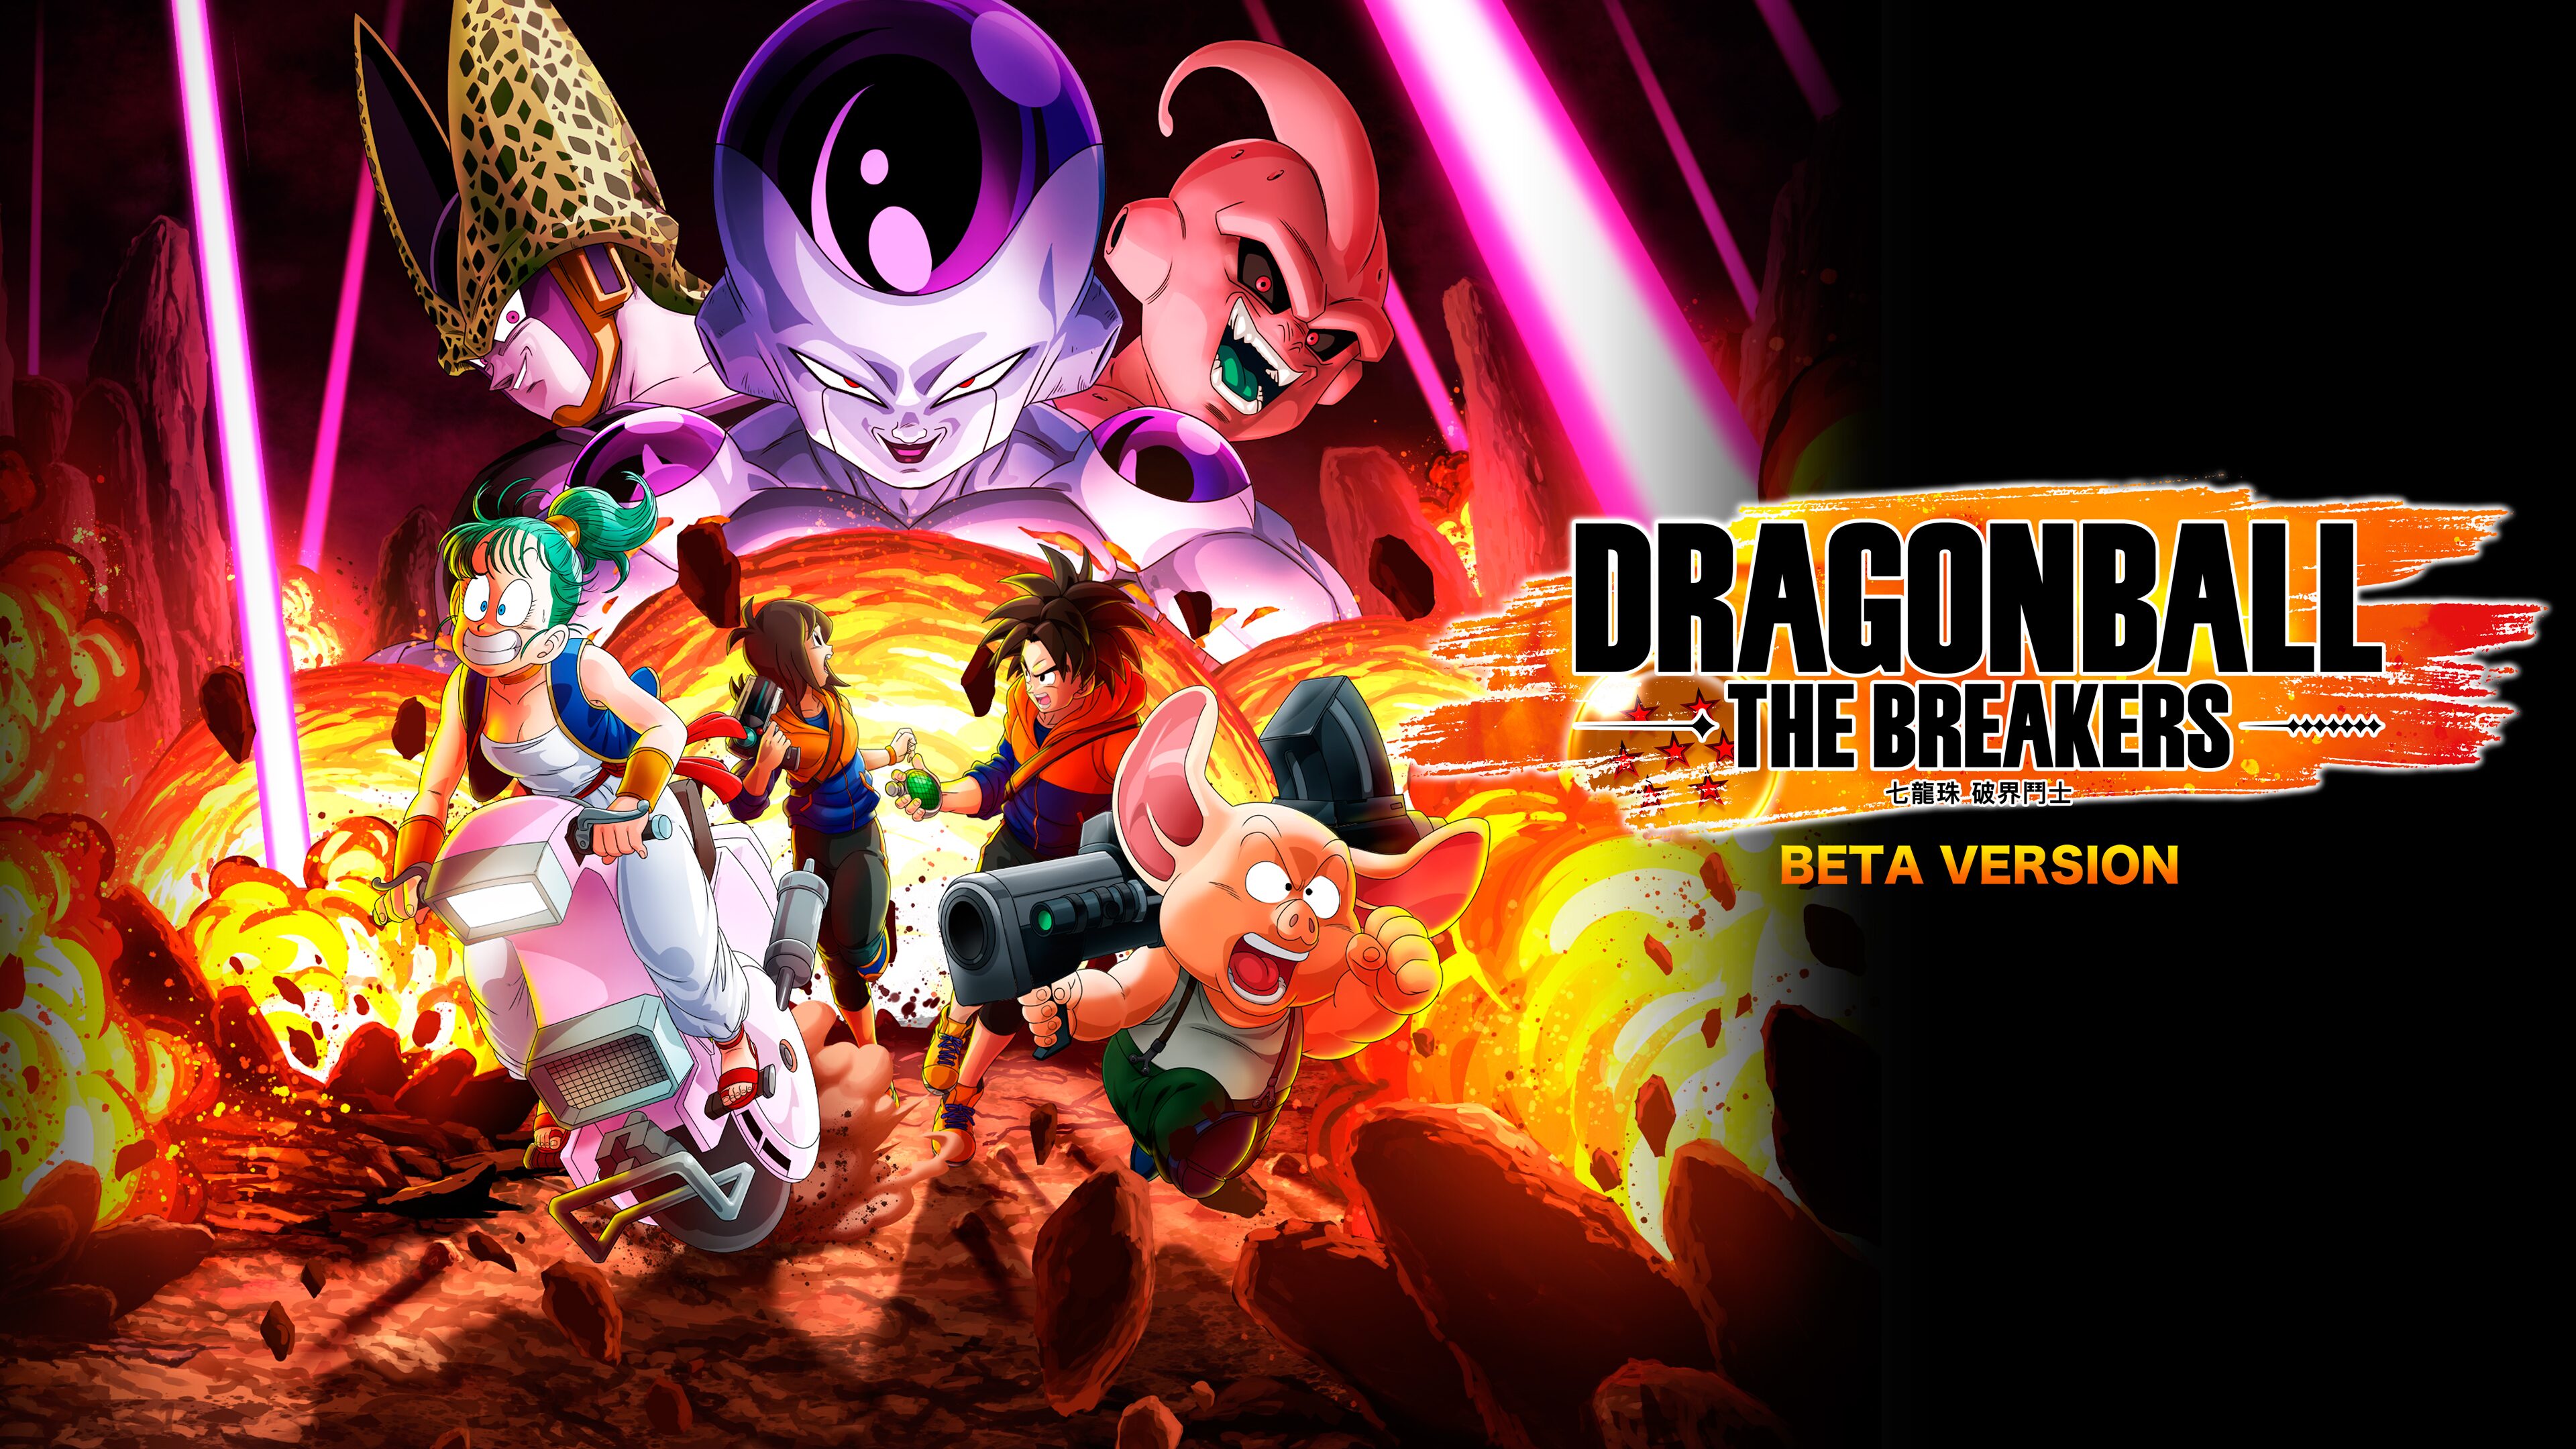 DRAGON BALL: THE BREAKERS Beta Version (Simplified Chinese, Korean, Japanese, Traditional Chinese)